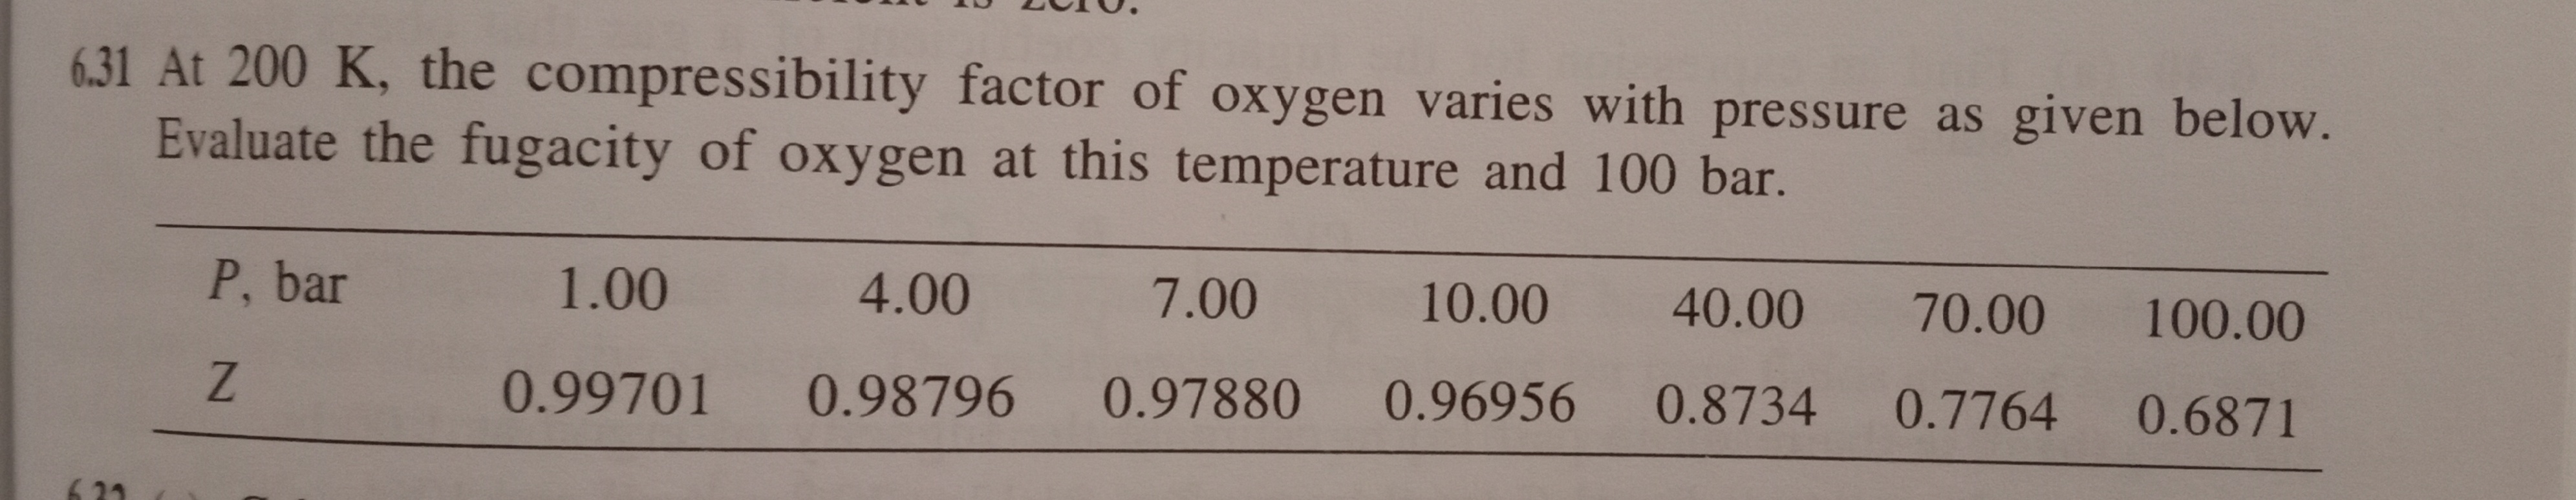 6.31 At 200 K, the compressibility factor of oxygen varies with pressure as given below.
Evaluate the fugacity of oxygen at this temperature and 100 bar.
P, bar
1.00
4.00
7.00
10.00 40.00
70.00
100.00
0.99701 0.98796
0.97880
0.96956
0.8734
0.7764
0.6871
